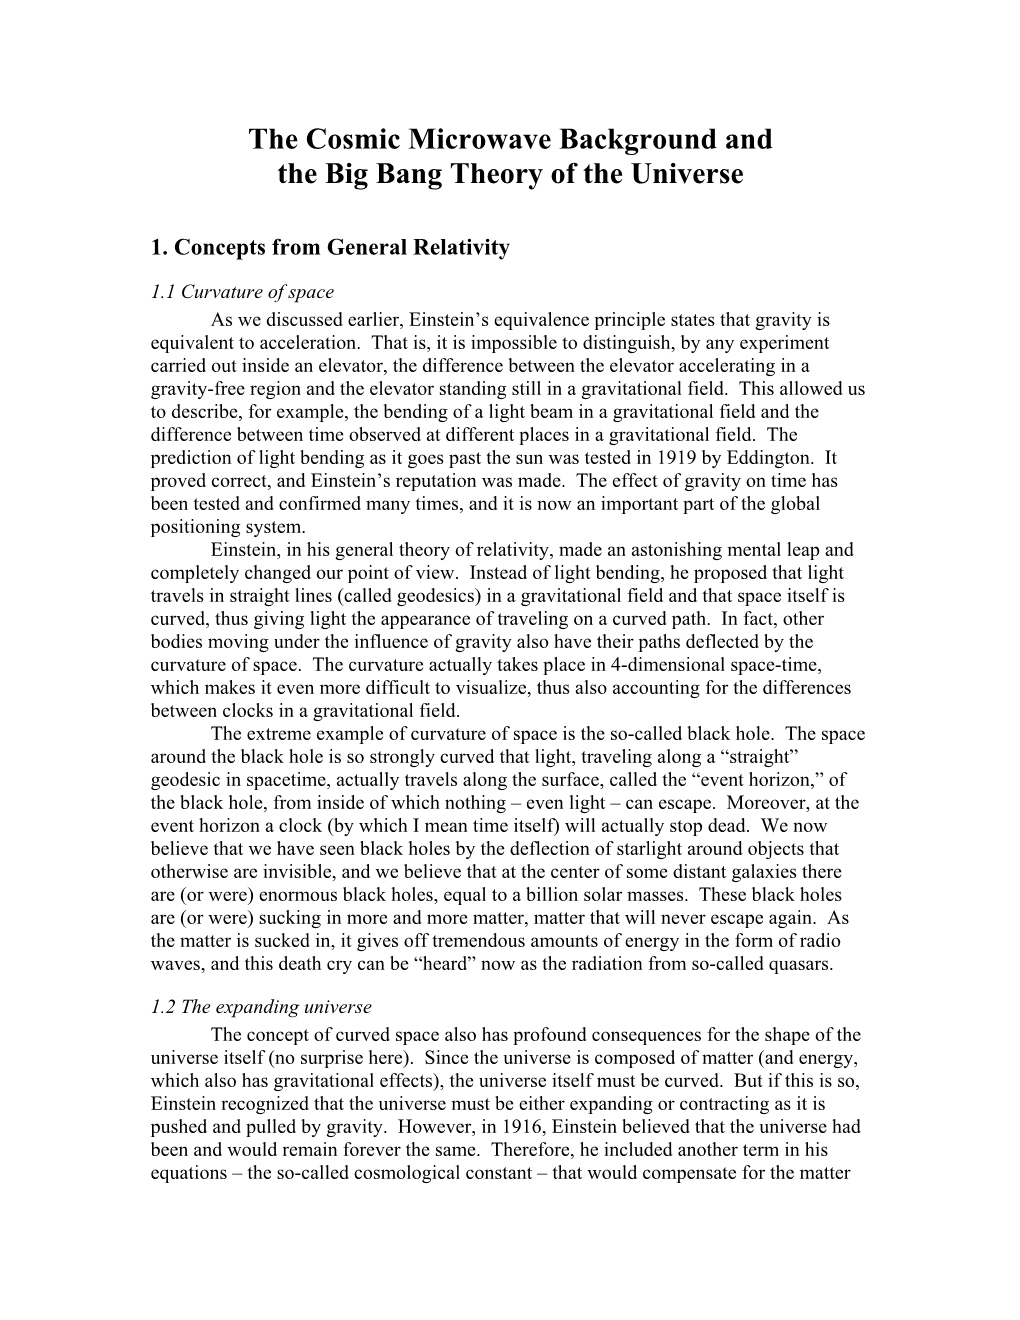 The Cosmic Microwave Background and the Big Bang Theory of the Universe